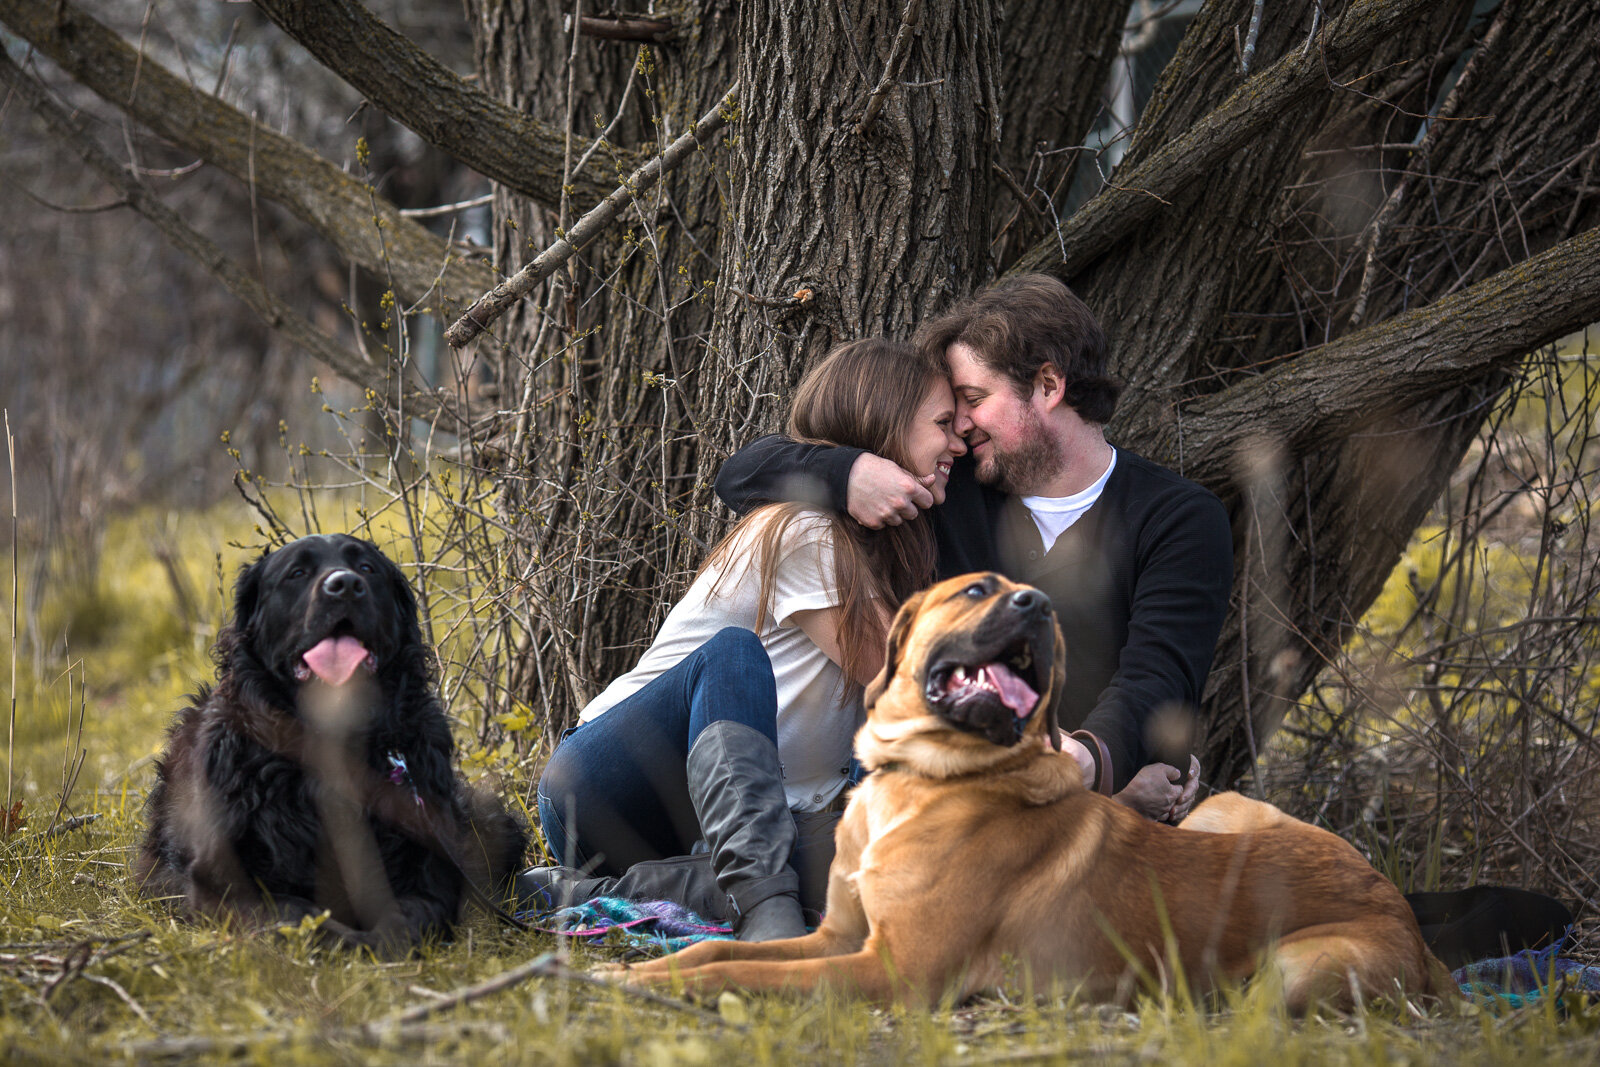 Lori_ two dogs Best_Engagement_1600PX-5586-2 (1).jpg